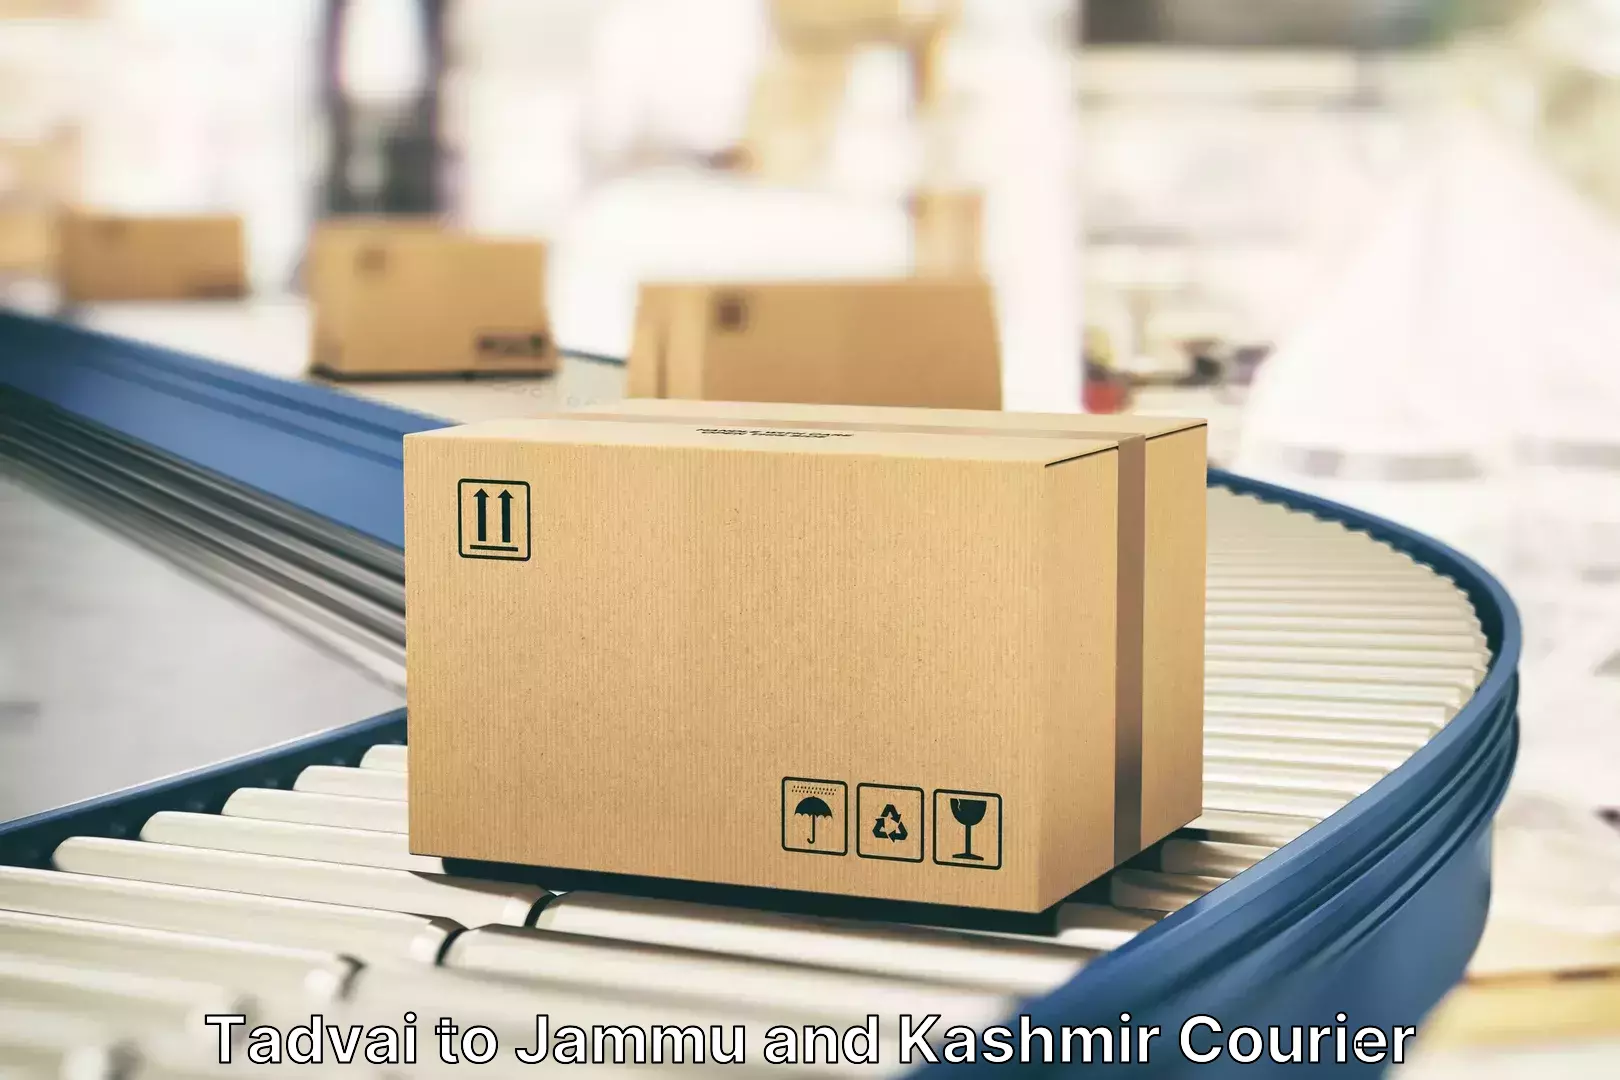 Luggage delivery providers Tadvai to Jammu and Kashmir